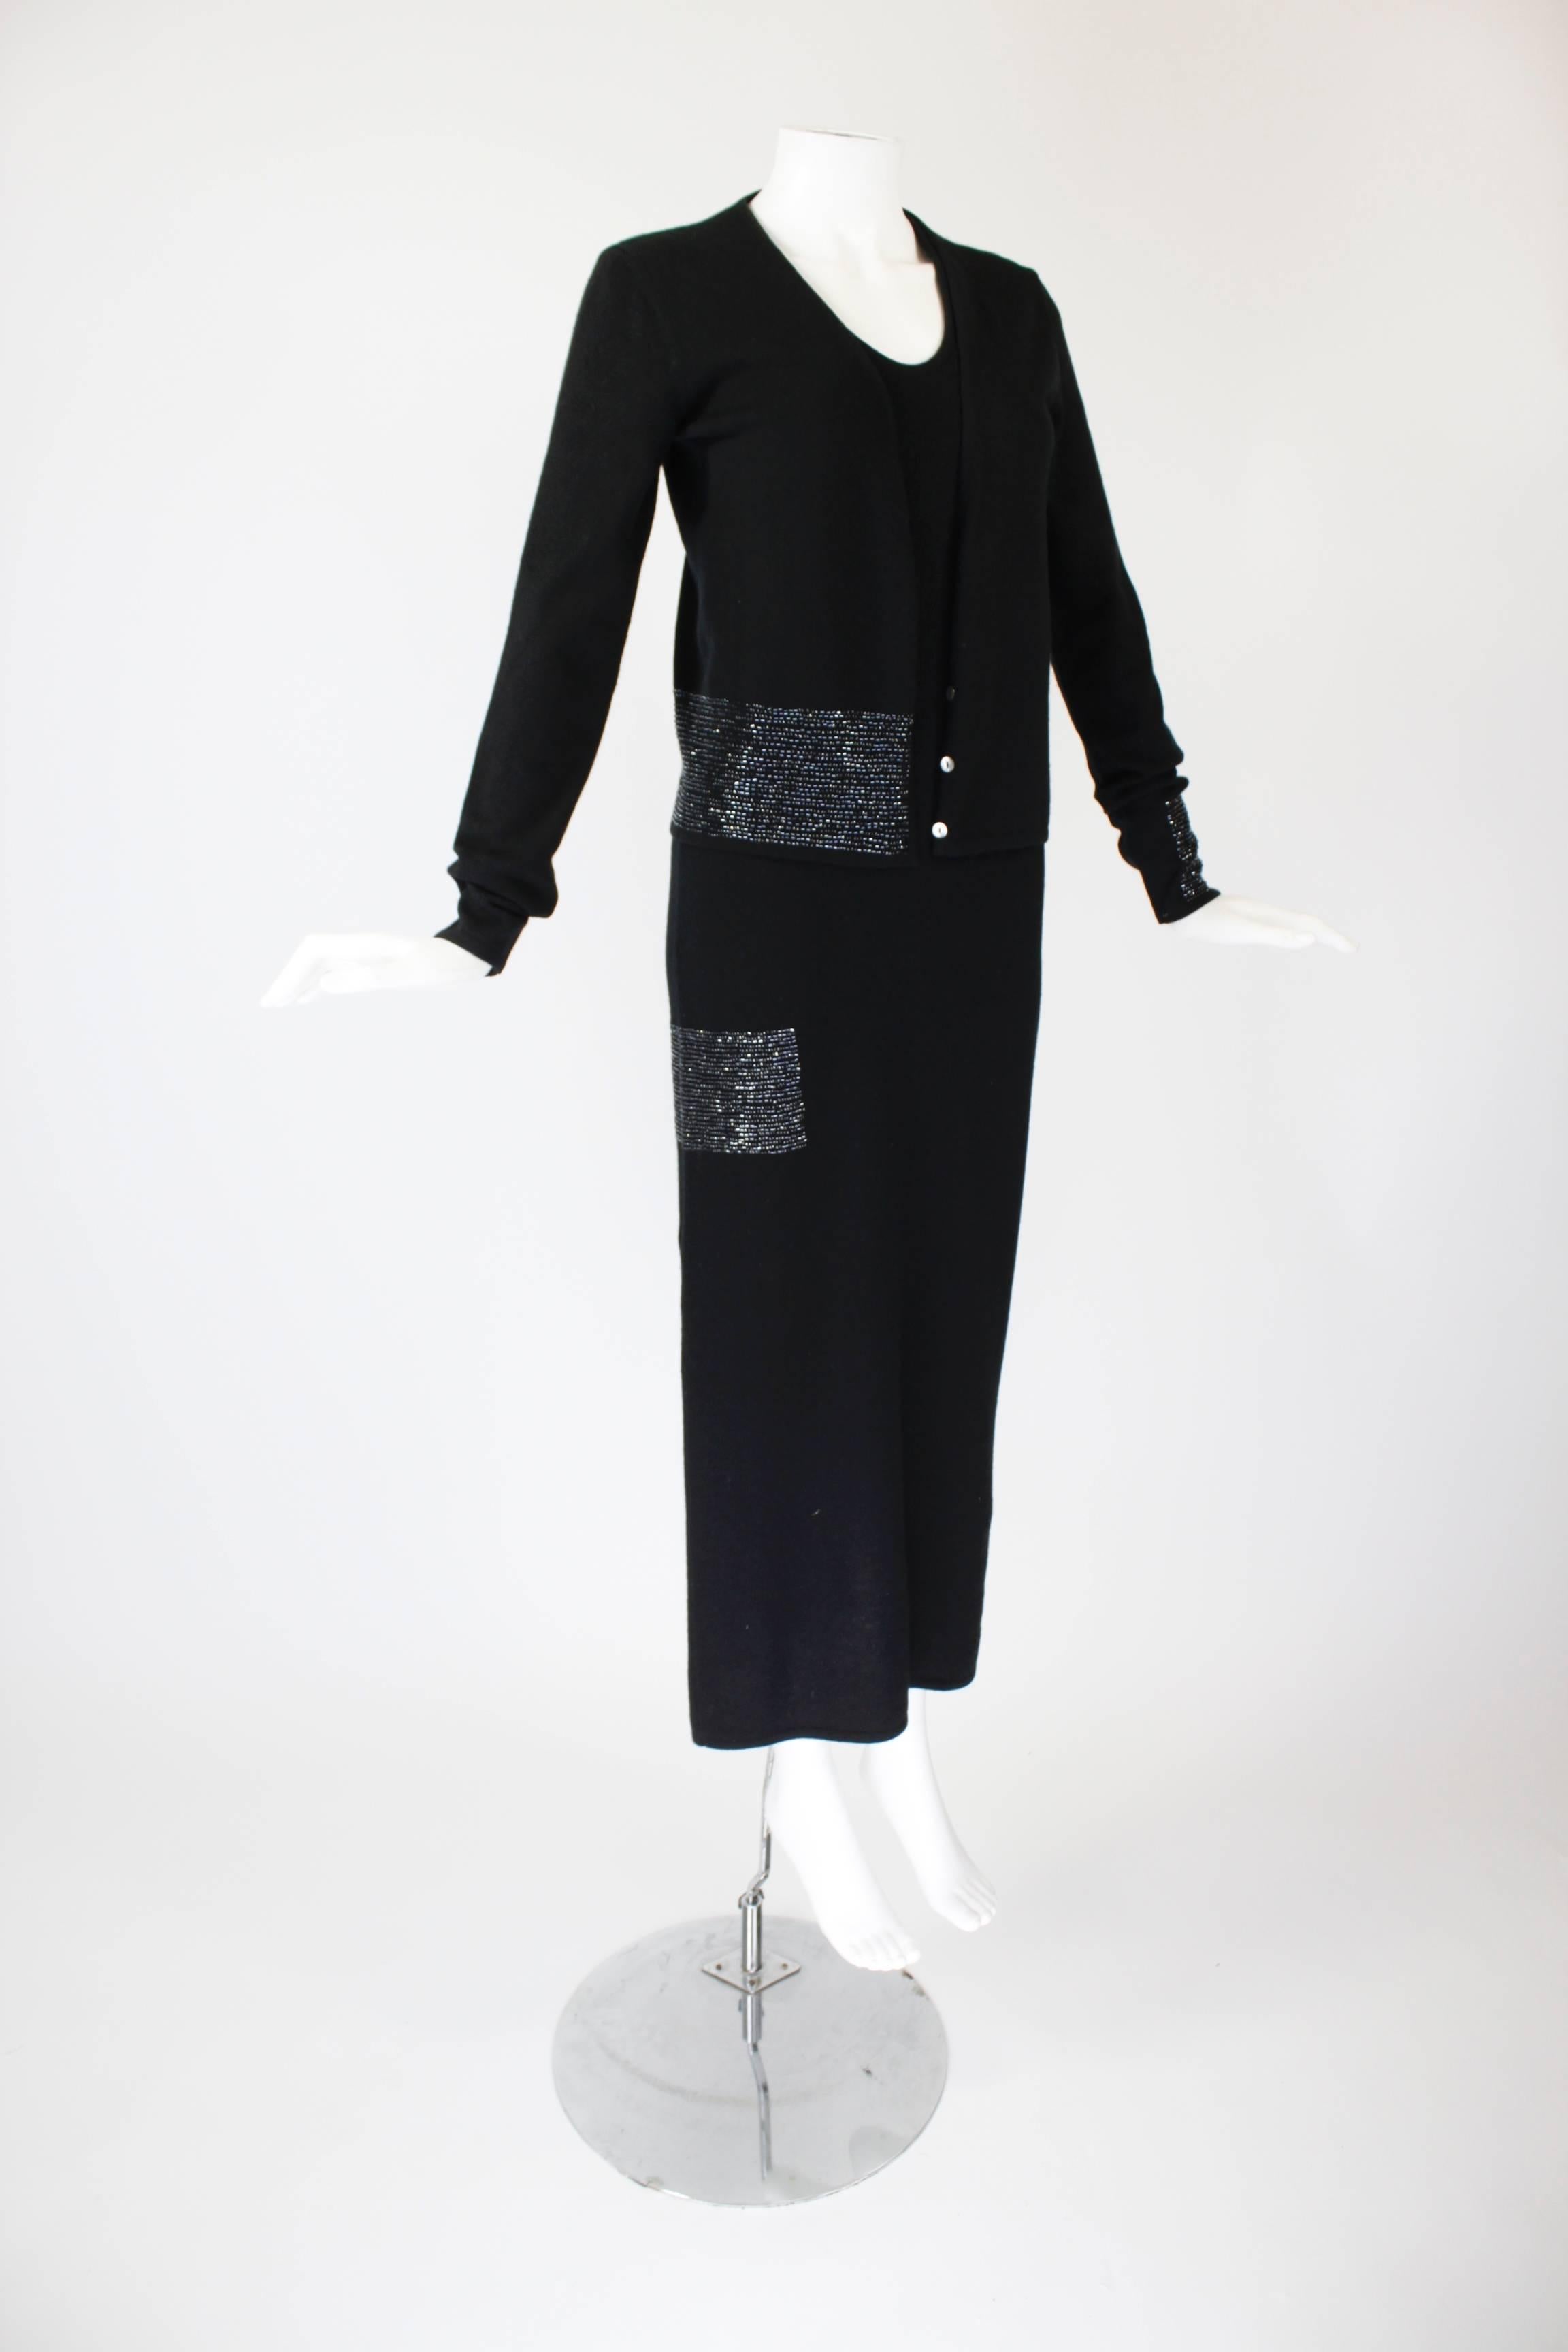 1990s Krizia Black Cashmere Beaded Dress with Shell For Sale 2